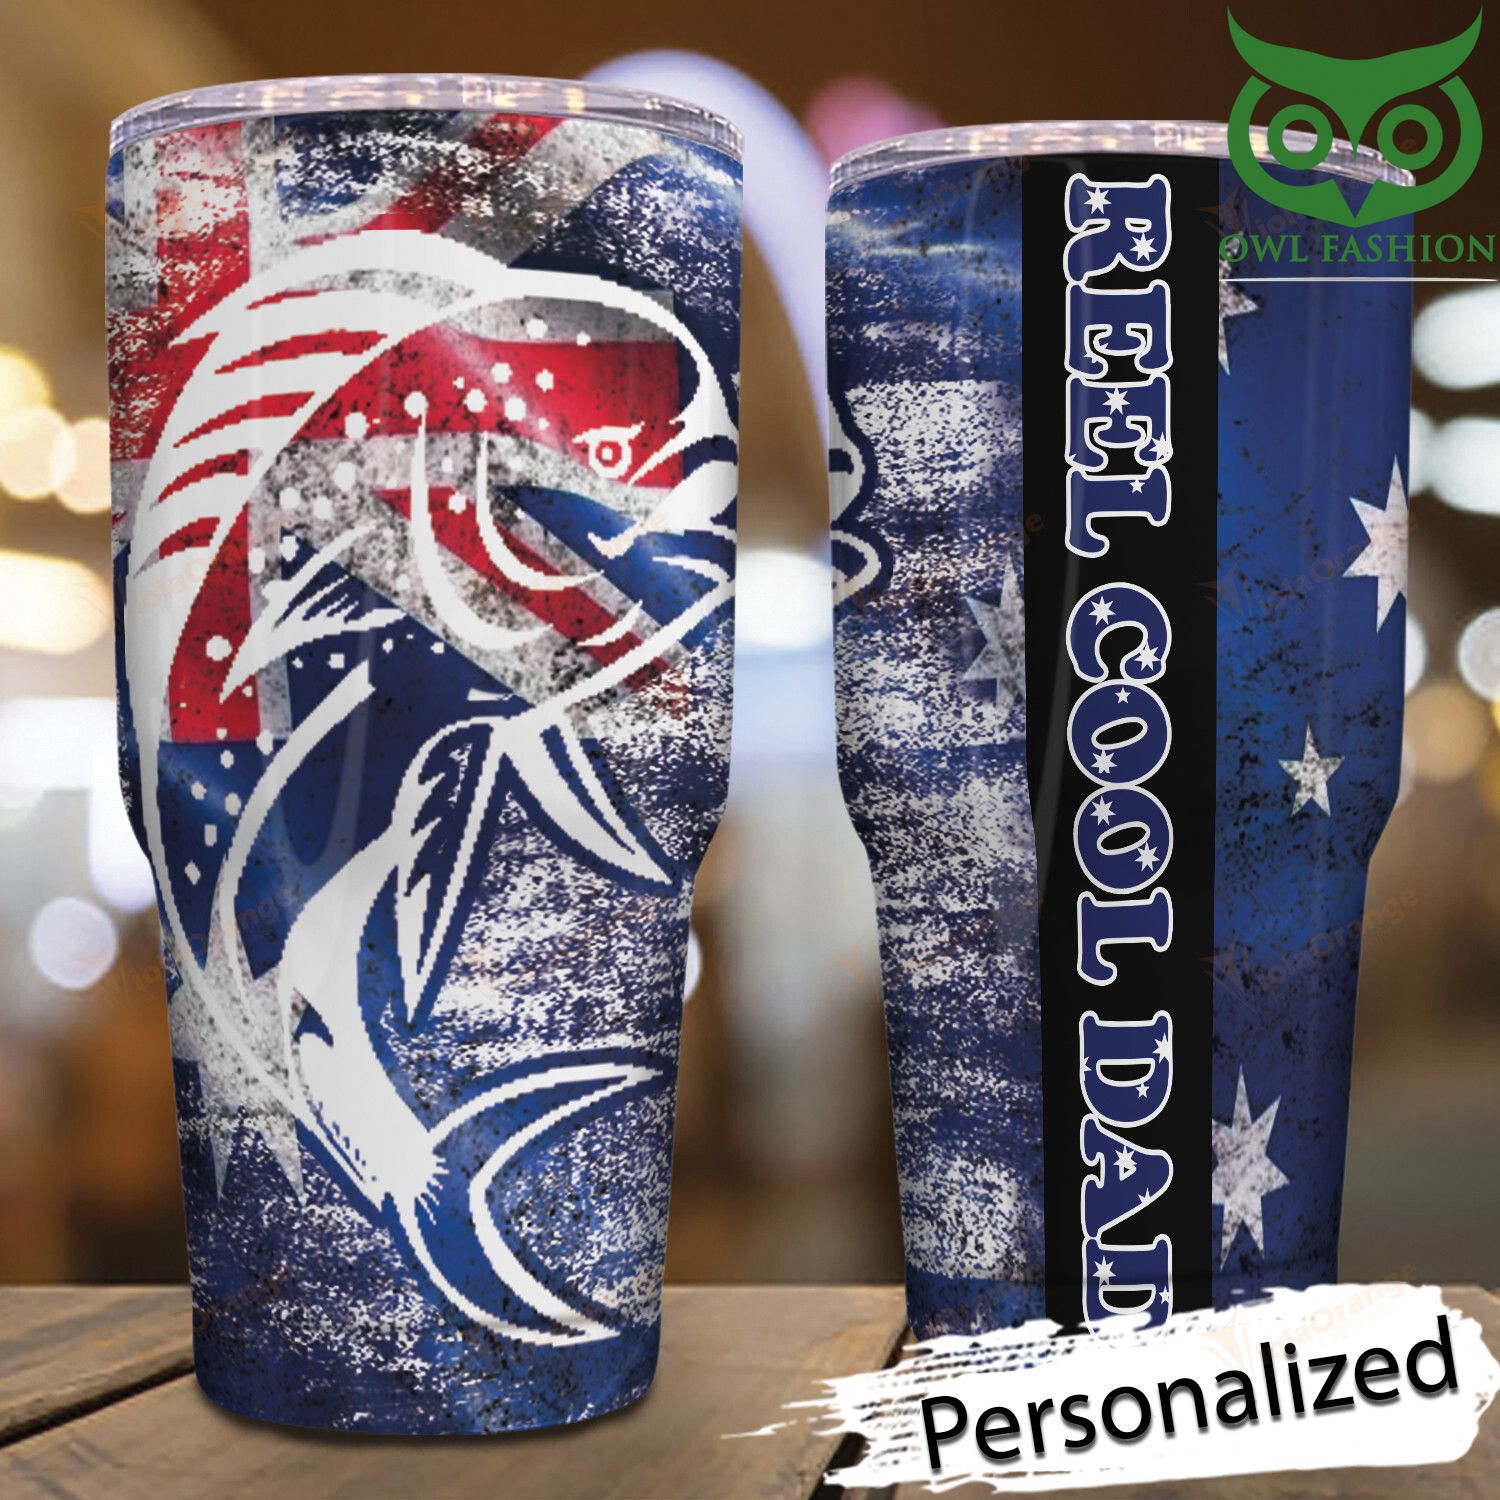 44 Personalized Fishing Aus stainless steel tumbler cup